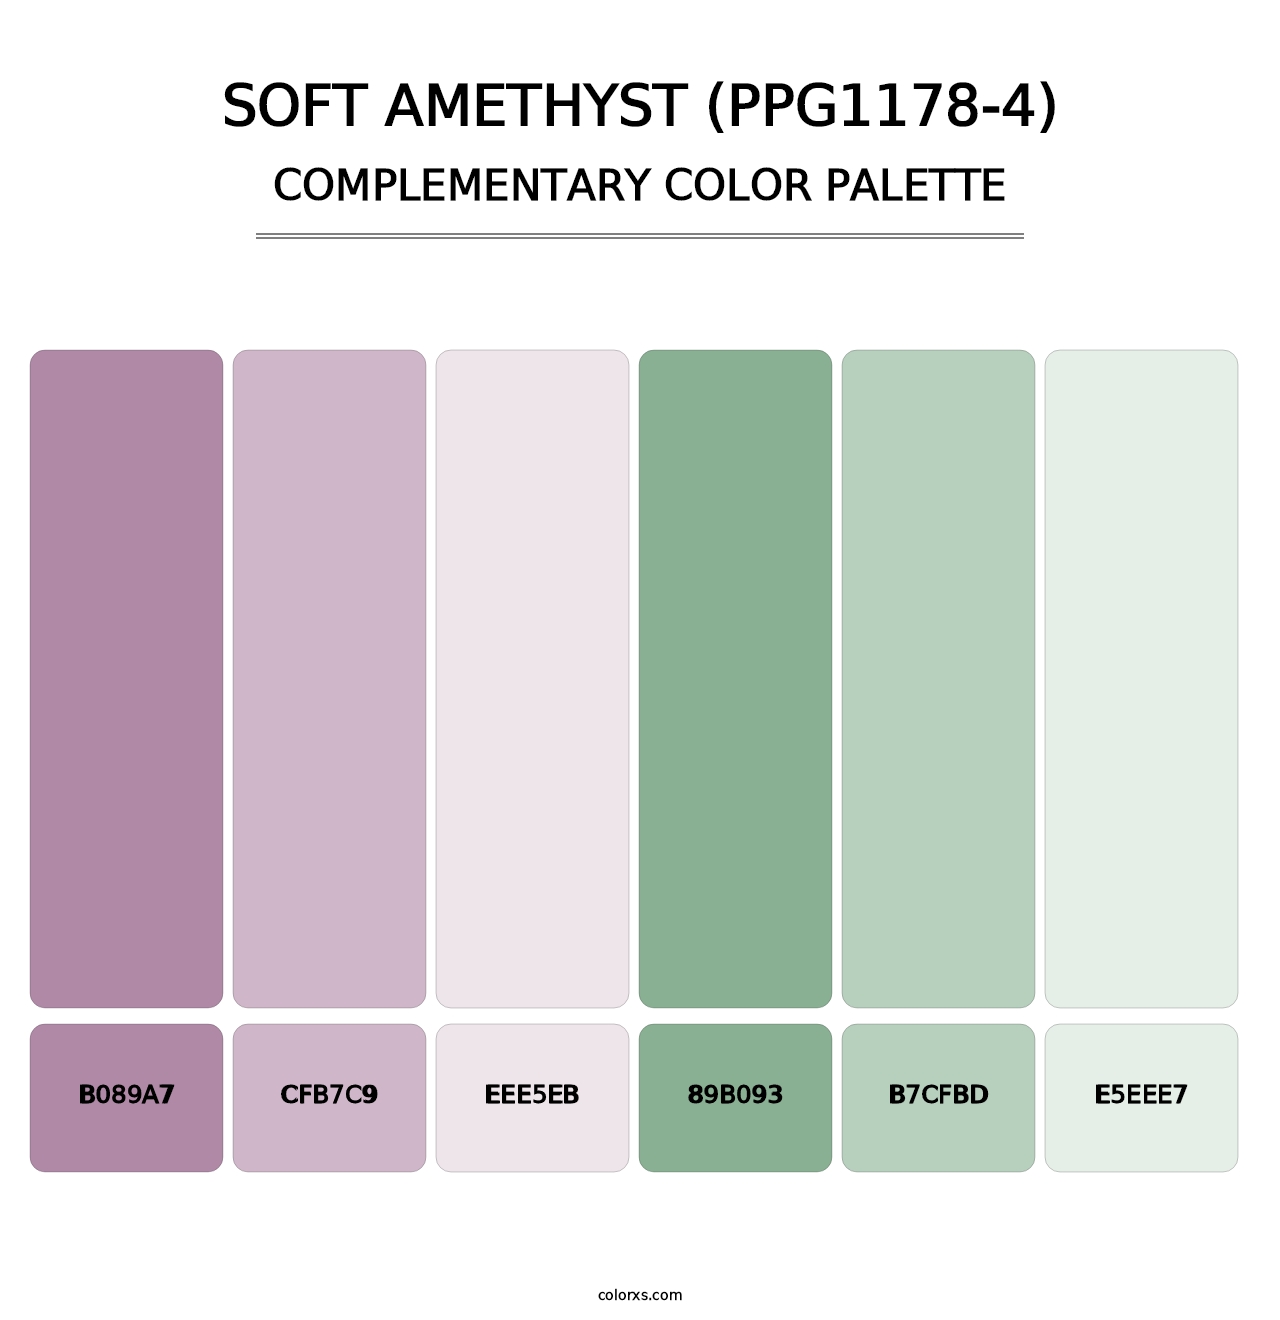 Soft Amethyst (PPG1178-4) - Complementary Color Palette